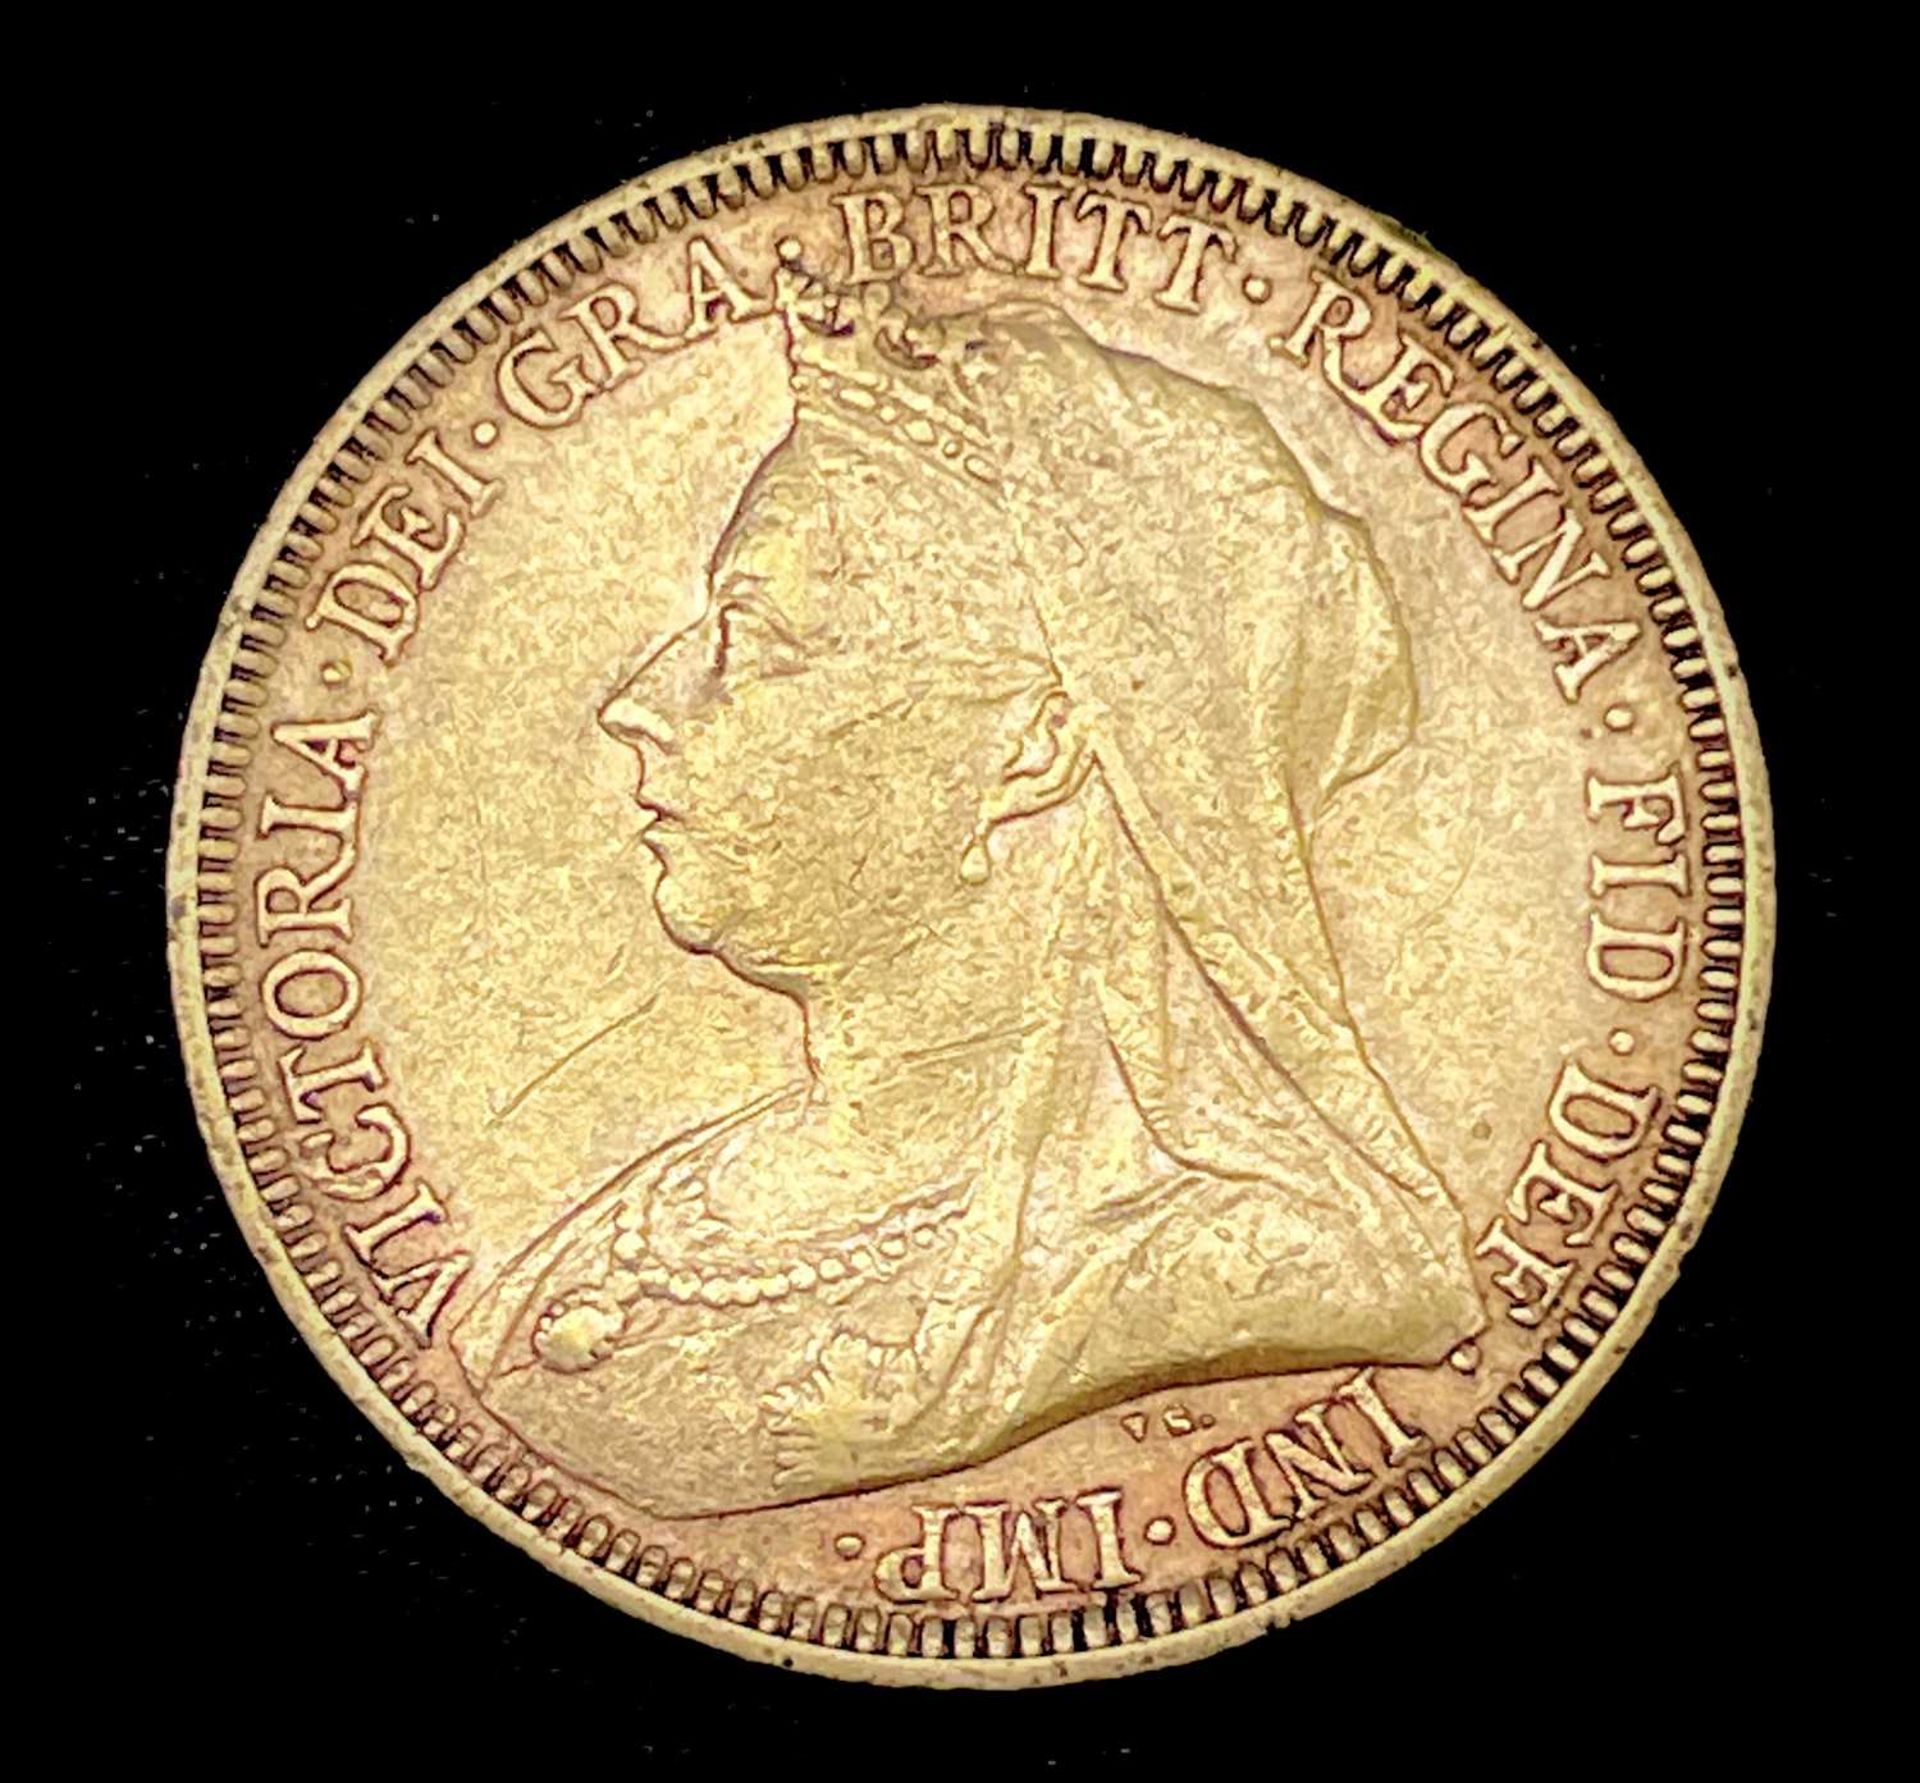 Great Britain Gold Sovereign 1894 Veiled Head. Melbourne Mint mark Condition: please request a - Image 2 of 2